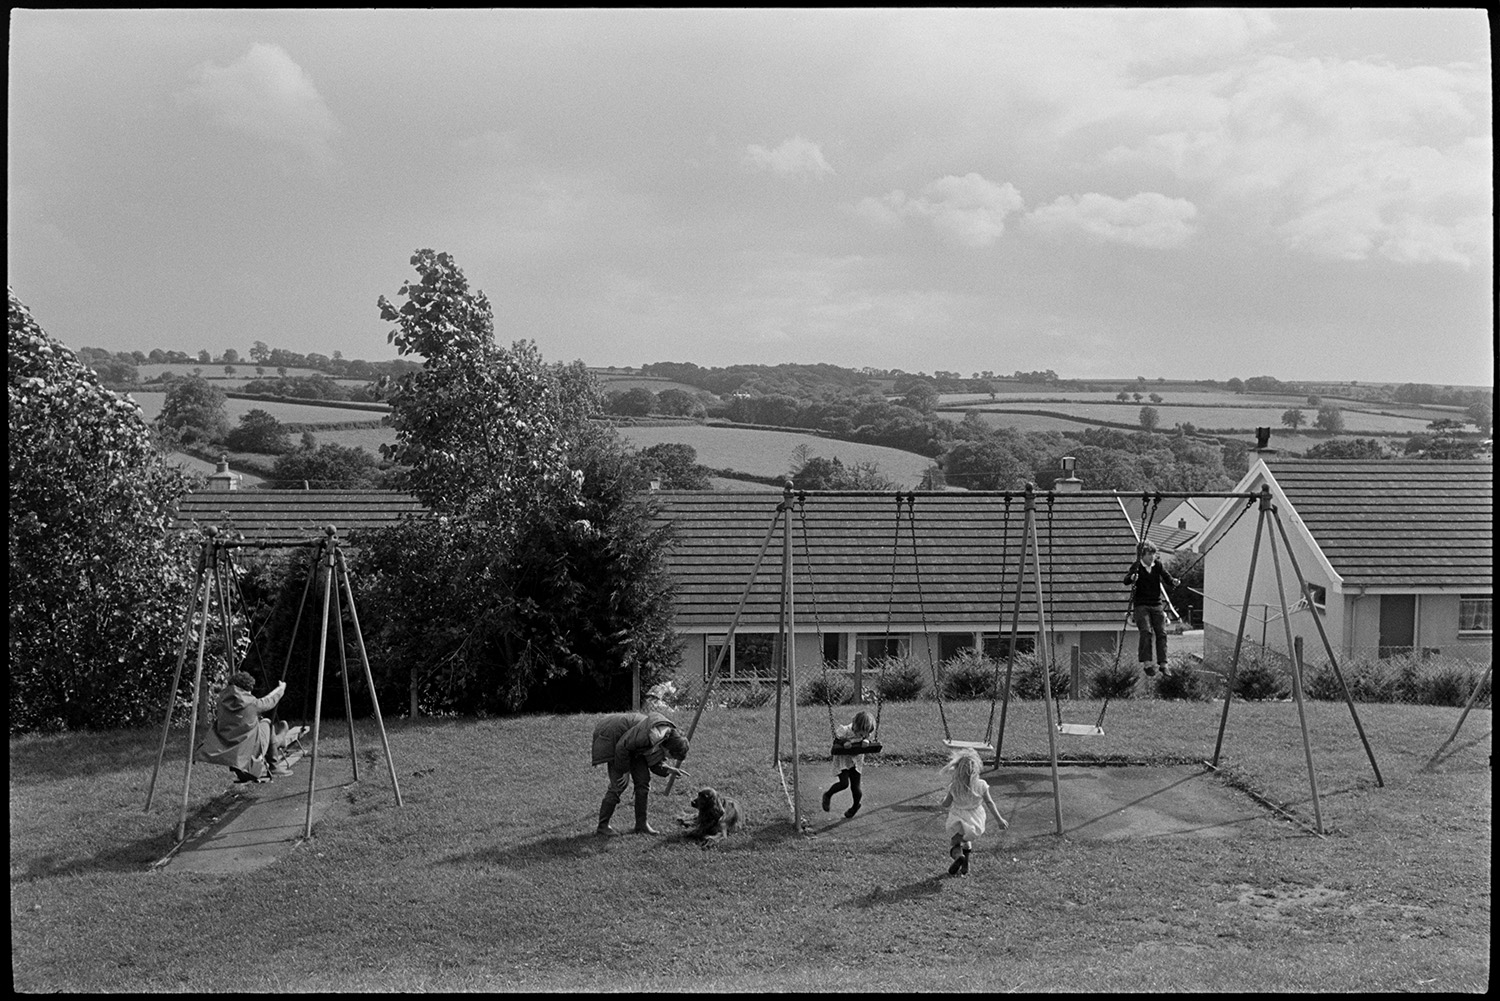 Children playing on swings in public playground. 
[Children playing on swings in a playground at Stafford Way, Dolton. A person is telling off a dog by the swings. Houses, fields and trees can be seen in the background.]